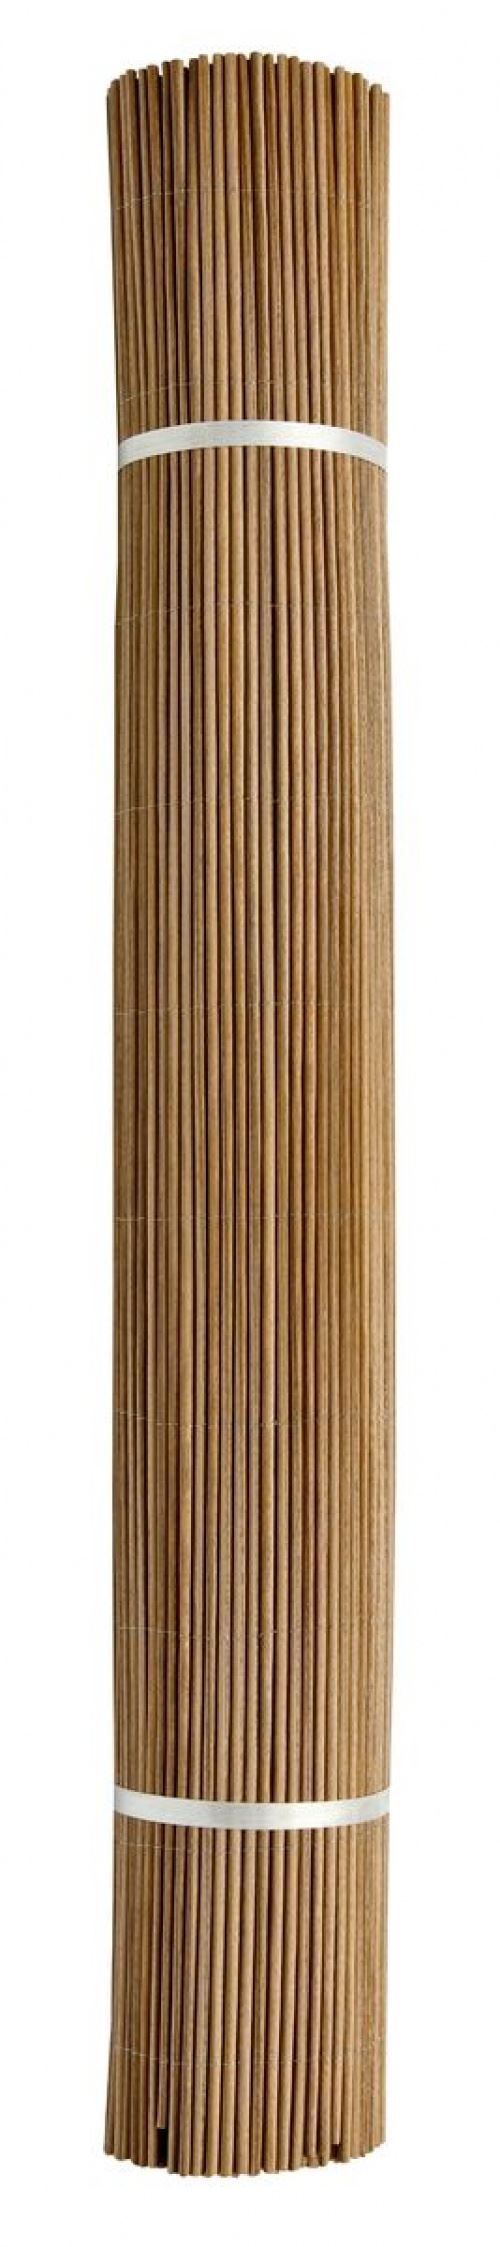 Canisse synthétique imitation osier naturel Fency Wick 1,50 x 3 m